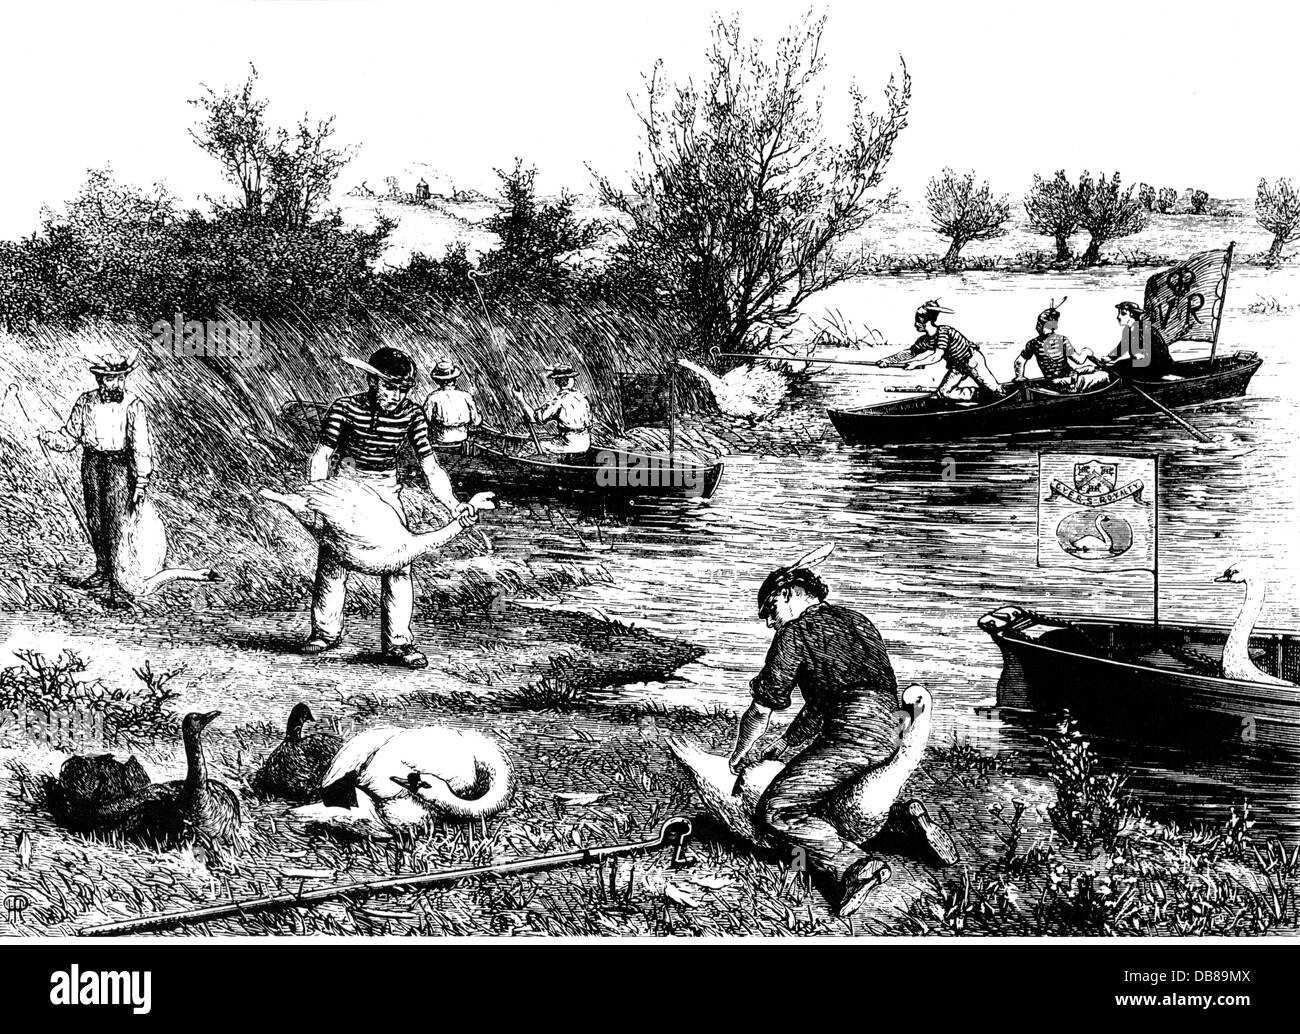 custom, Swan Upping on the Thames, wood engraving, 'Illustrated Sporting and Dramatic News', 1875, Additional-Rights-Clearences-Not Available Stock Photo